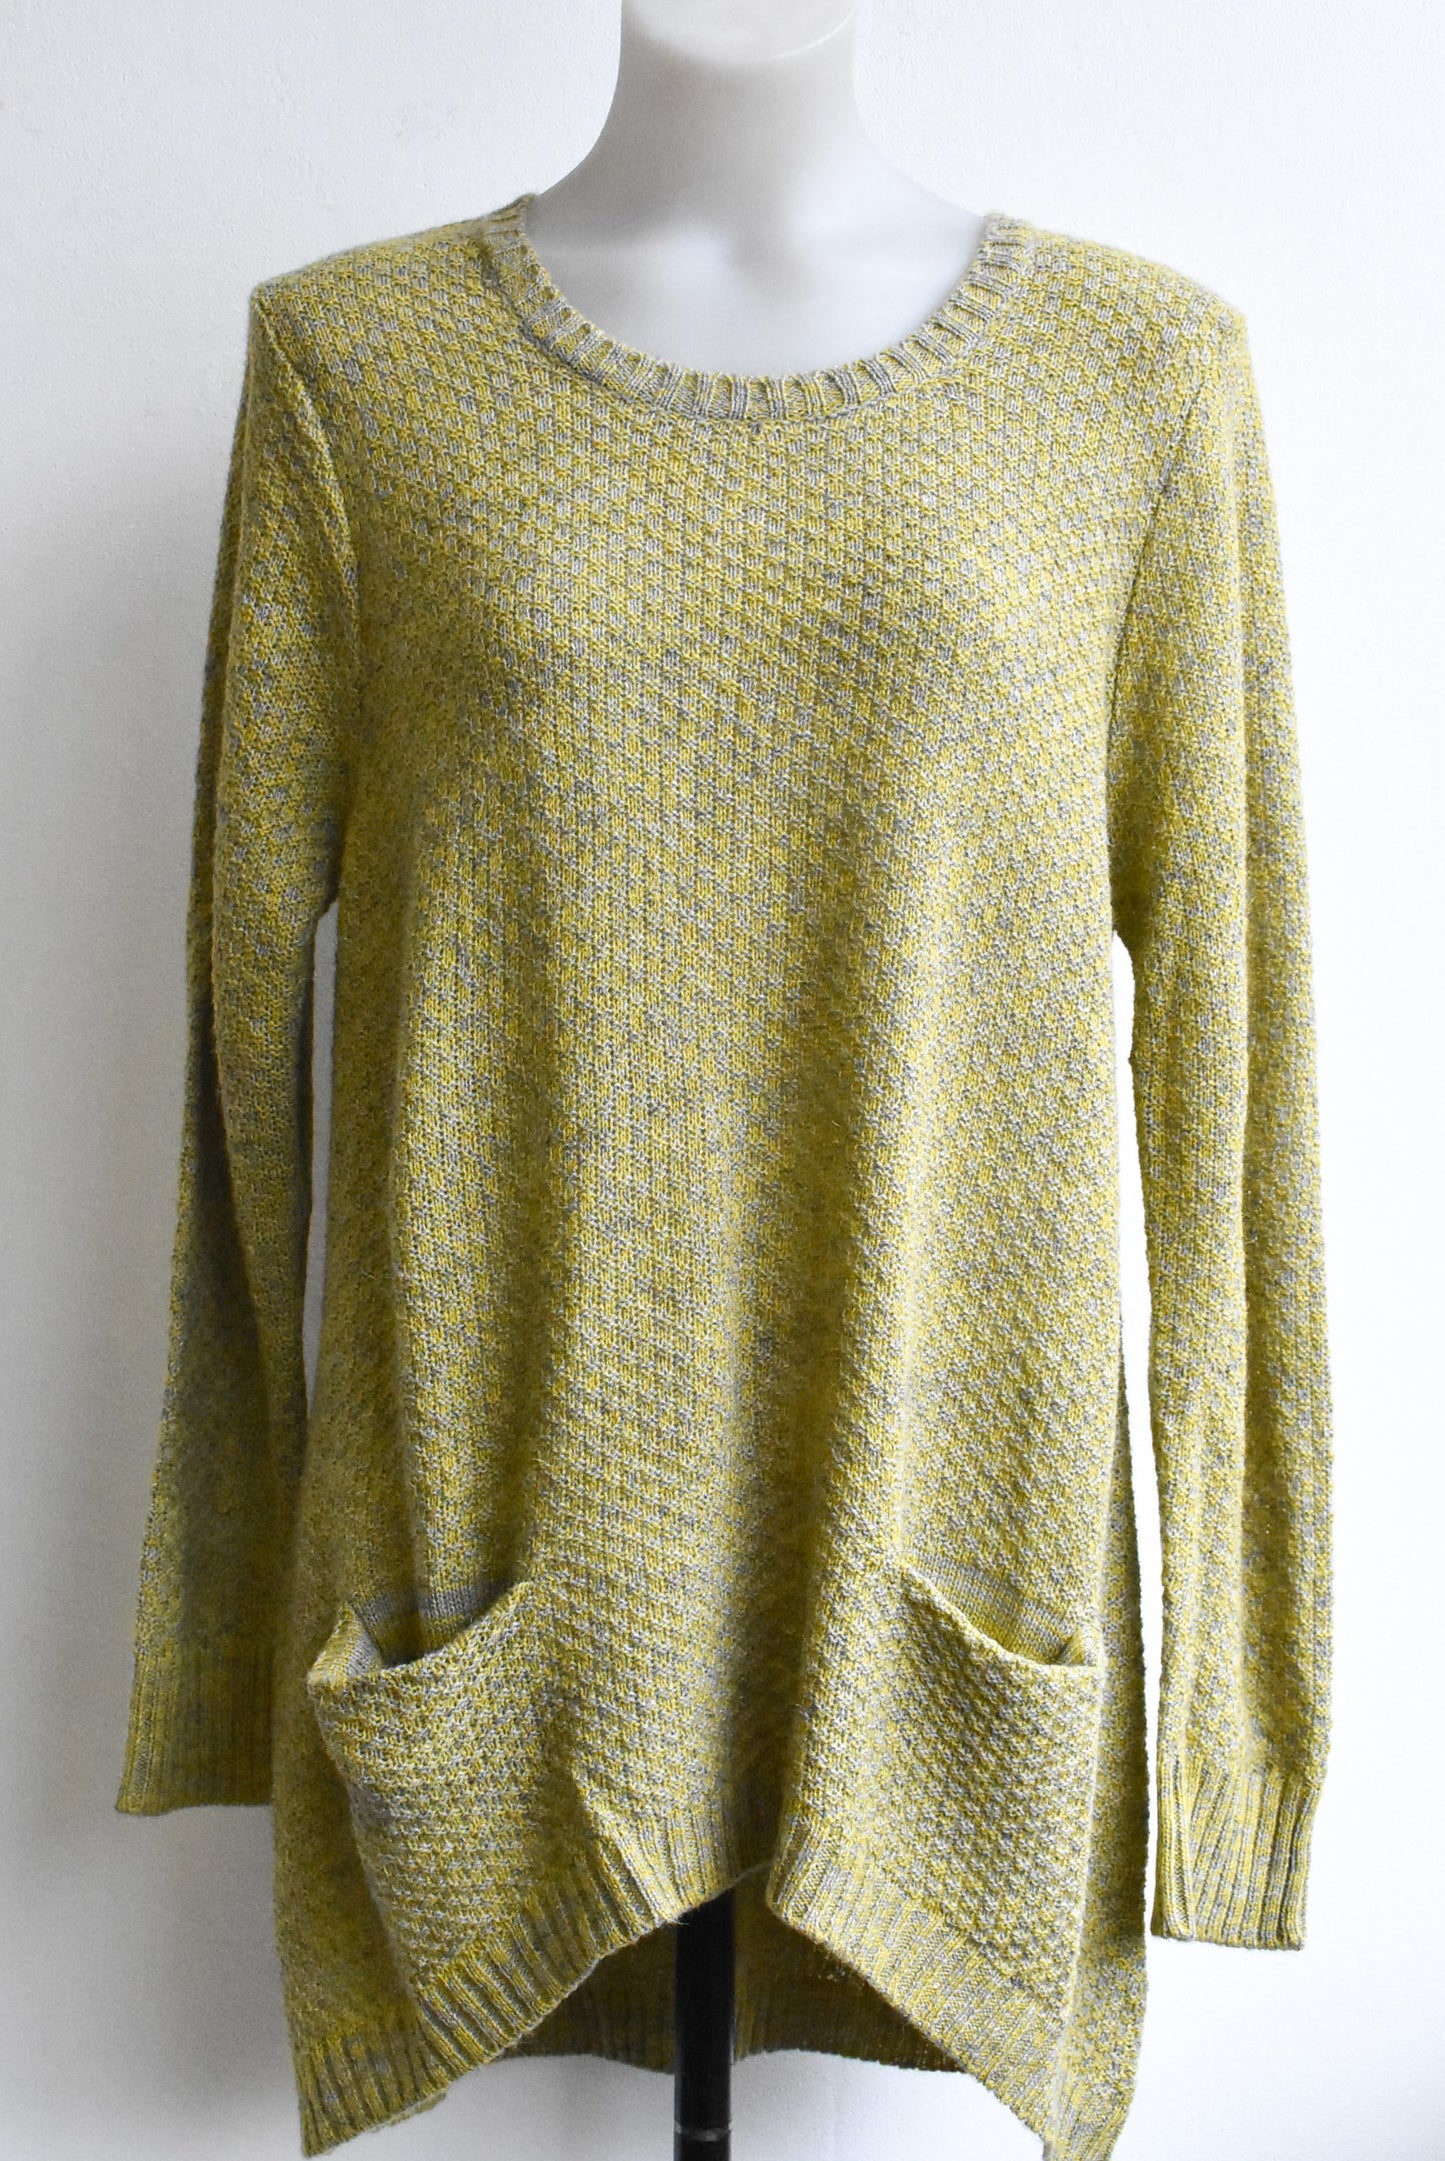 Foil yellow blend jumper with pockets, size L